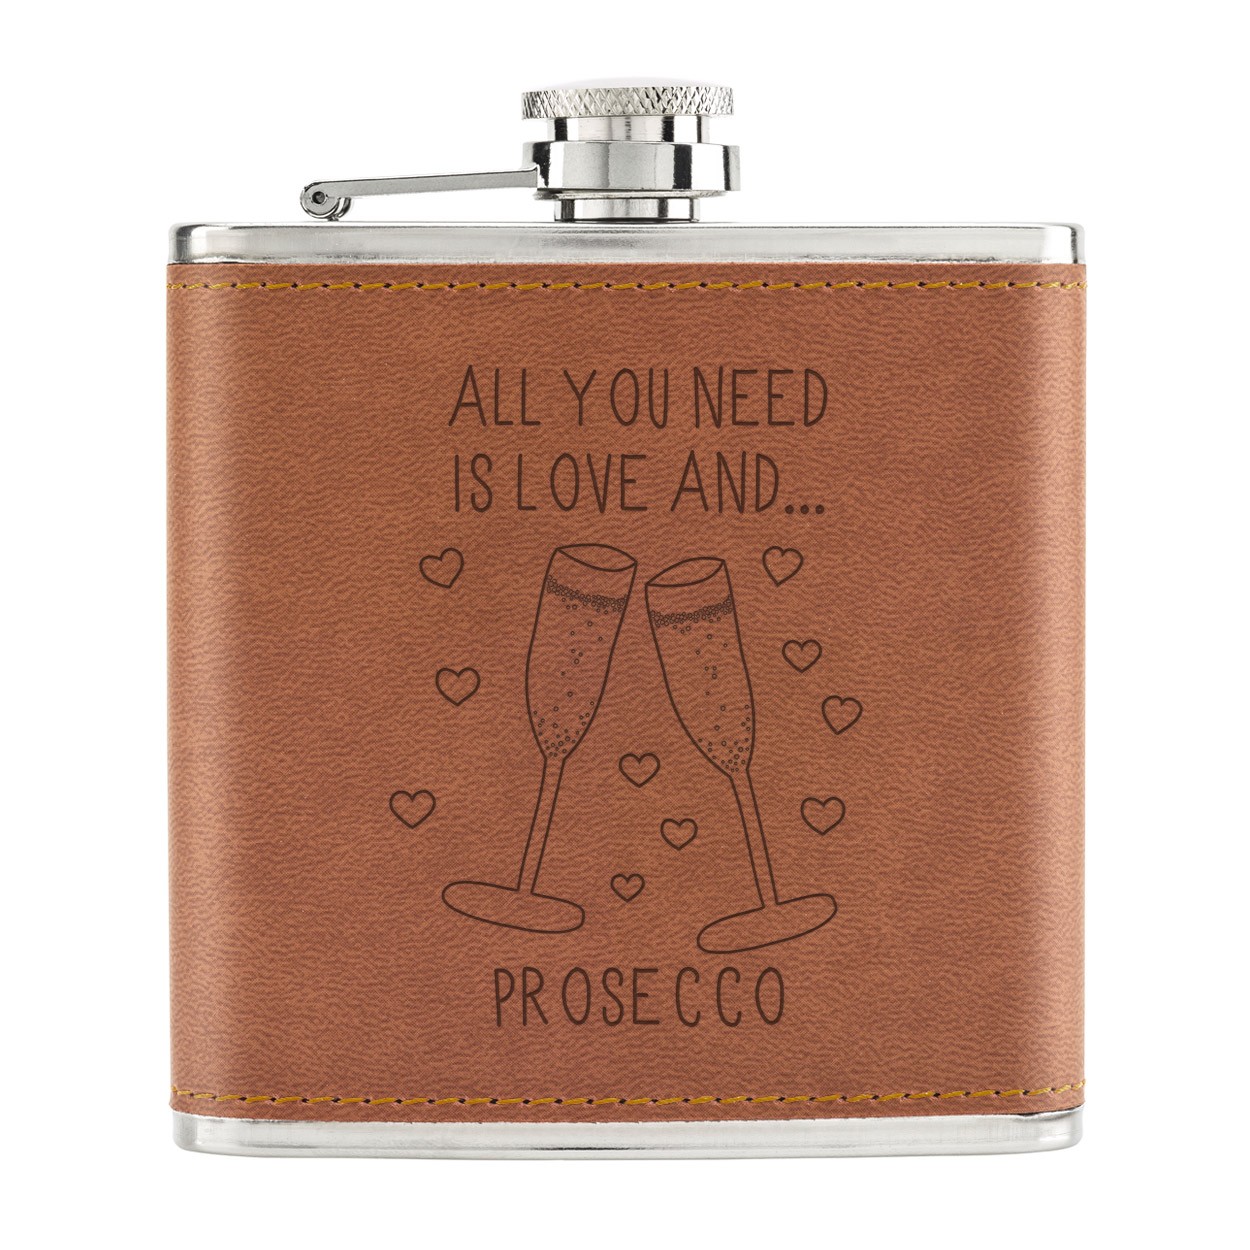 All You Need Is Love And Prosecco 6oz PU Leather Hip Flask Tan